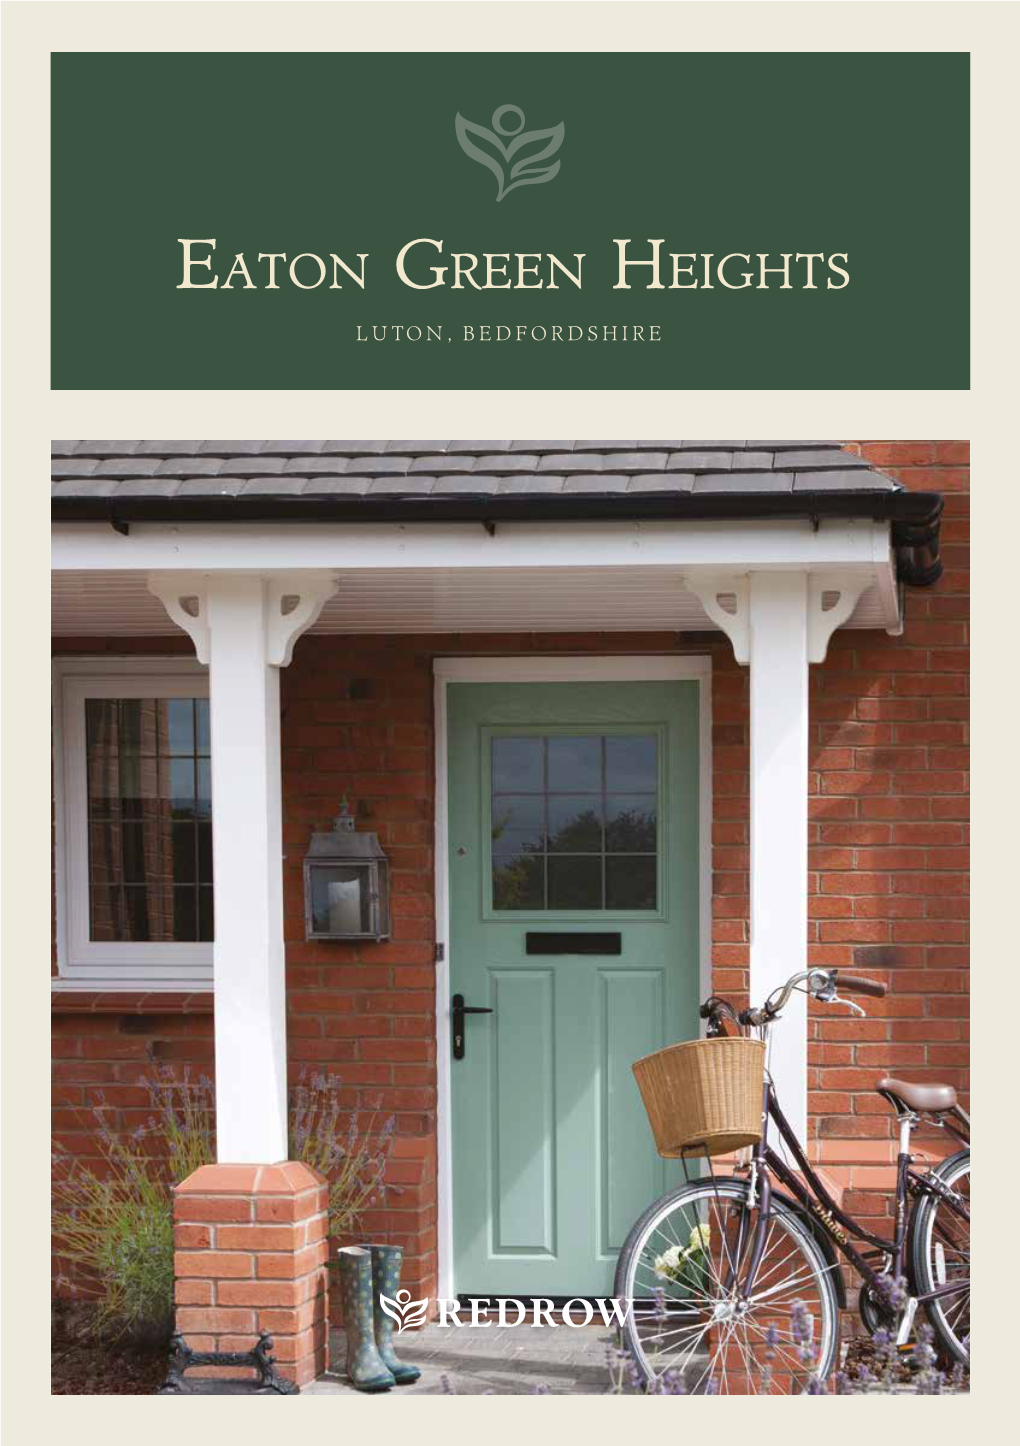 Eaton Green Heights LUTON, BEDFORDSHIRE Welcome to EATON GREEN HEIGHTS